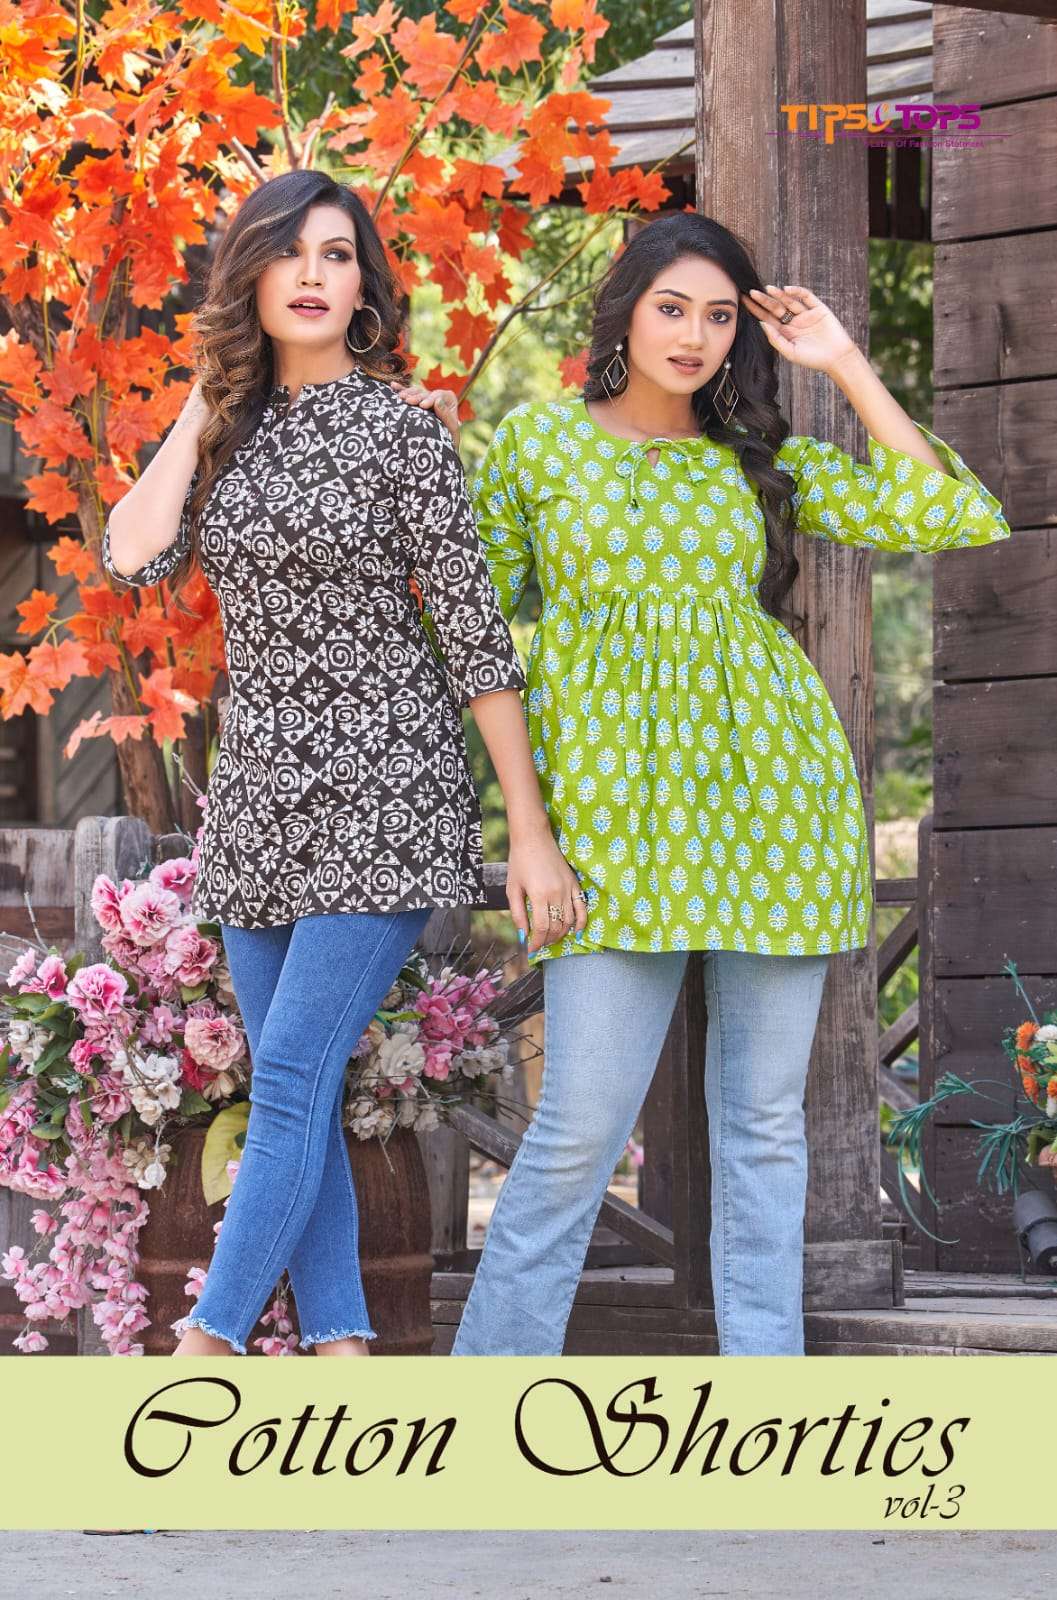 Tips And Tops Cotton Shorties Vol 3 Fancy Print Cotton Short Top Catalog Supplier